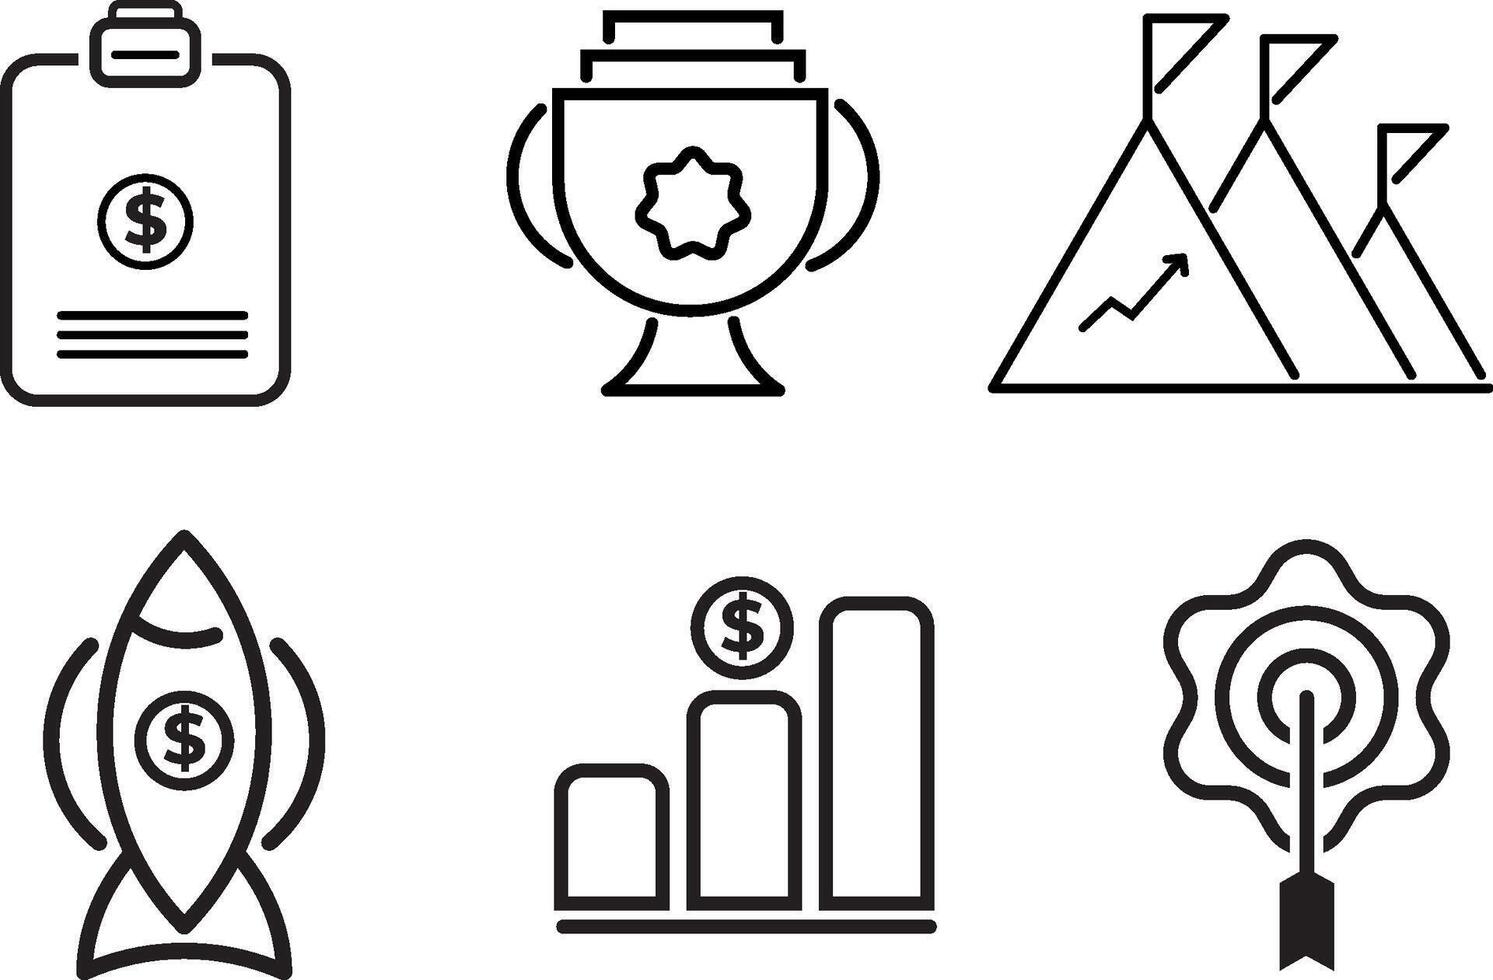 Awards line icons set. Award, Trophy cup, Business Growth Icon, Target, Money, Rocket Symbol, Vector Icon